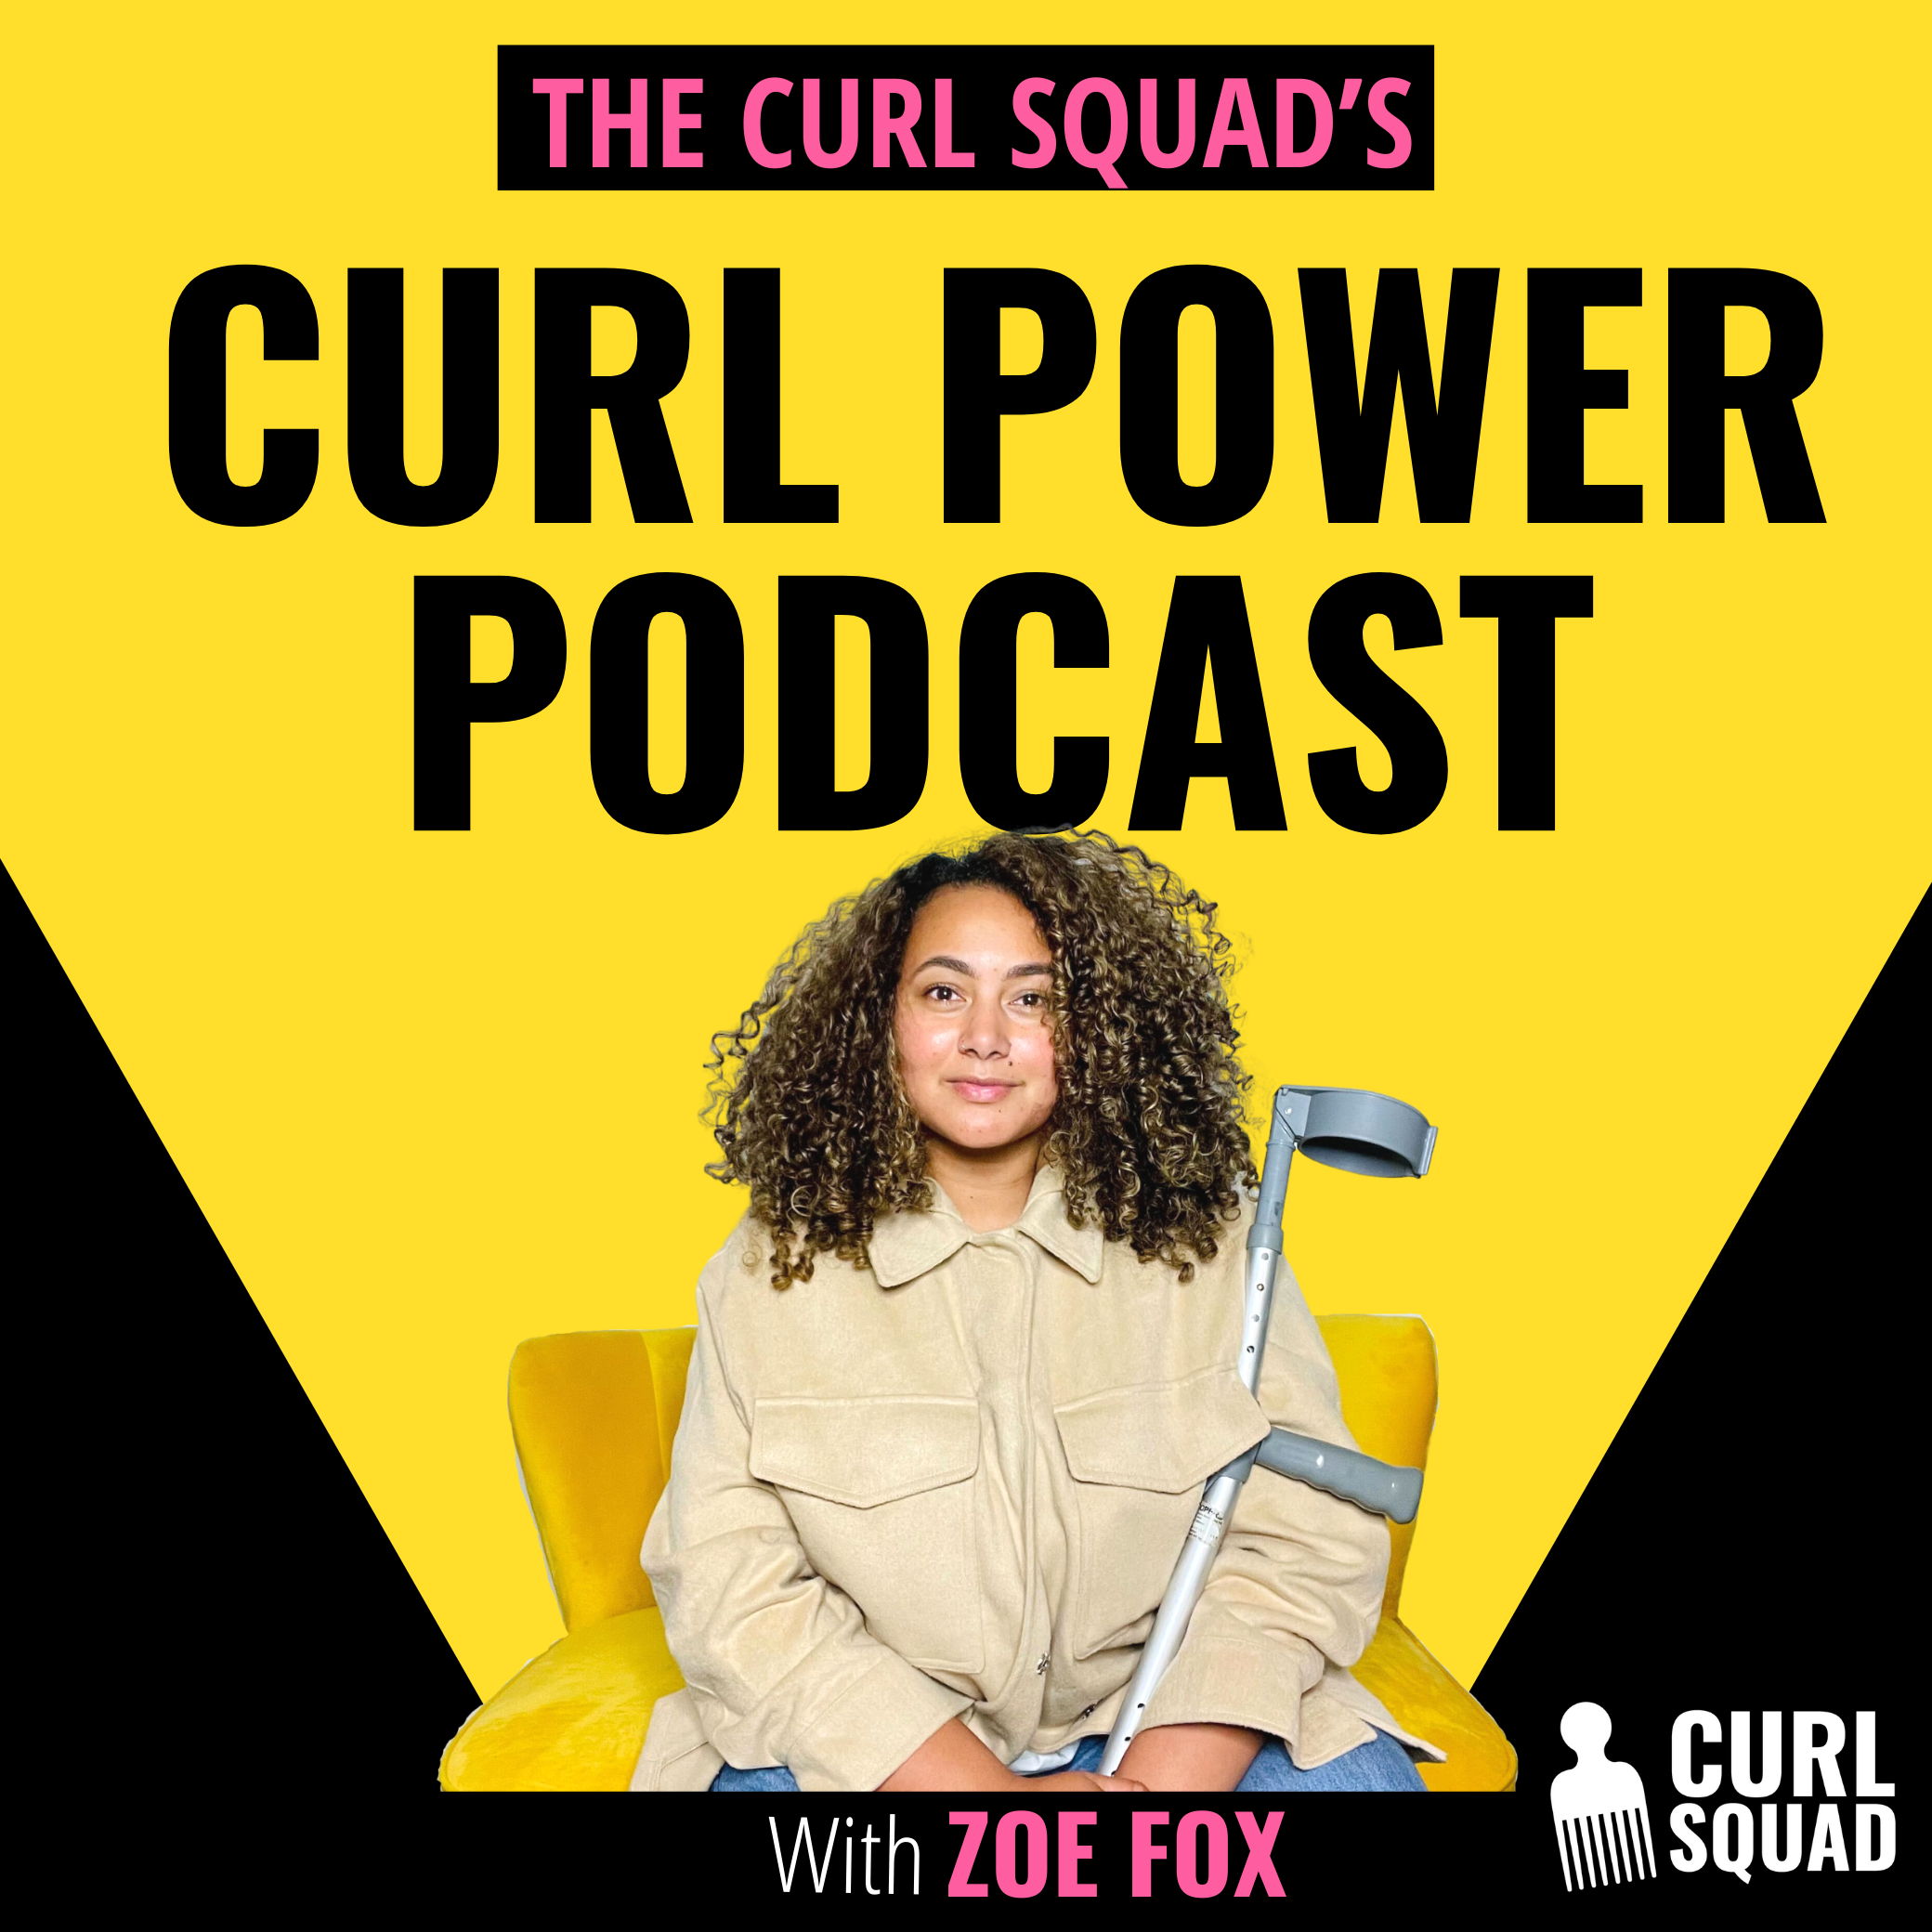 Curl Power Podcast